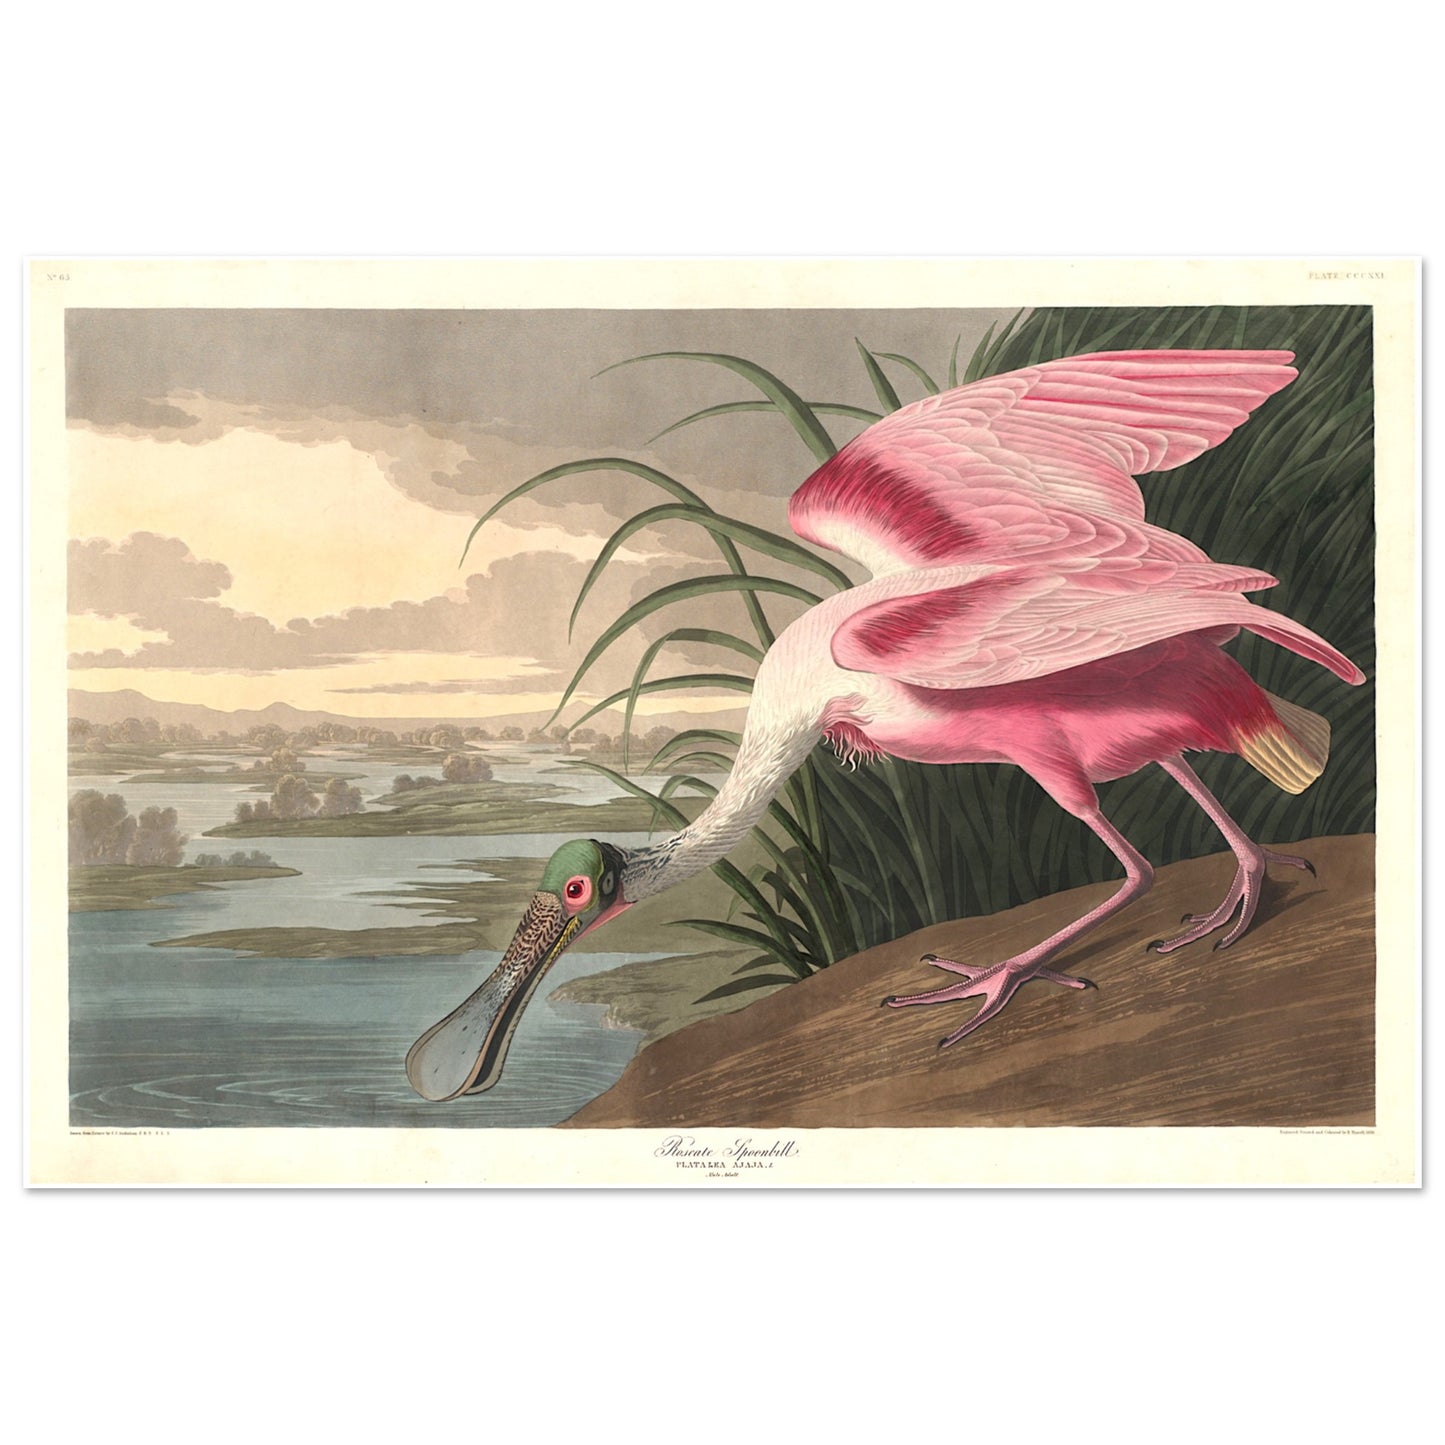 Audubon’s illustration of a Roseate Spoonbill from Birds of America. A regular site in much of Florida.